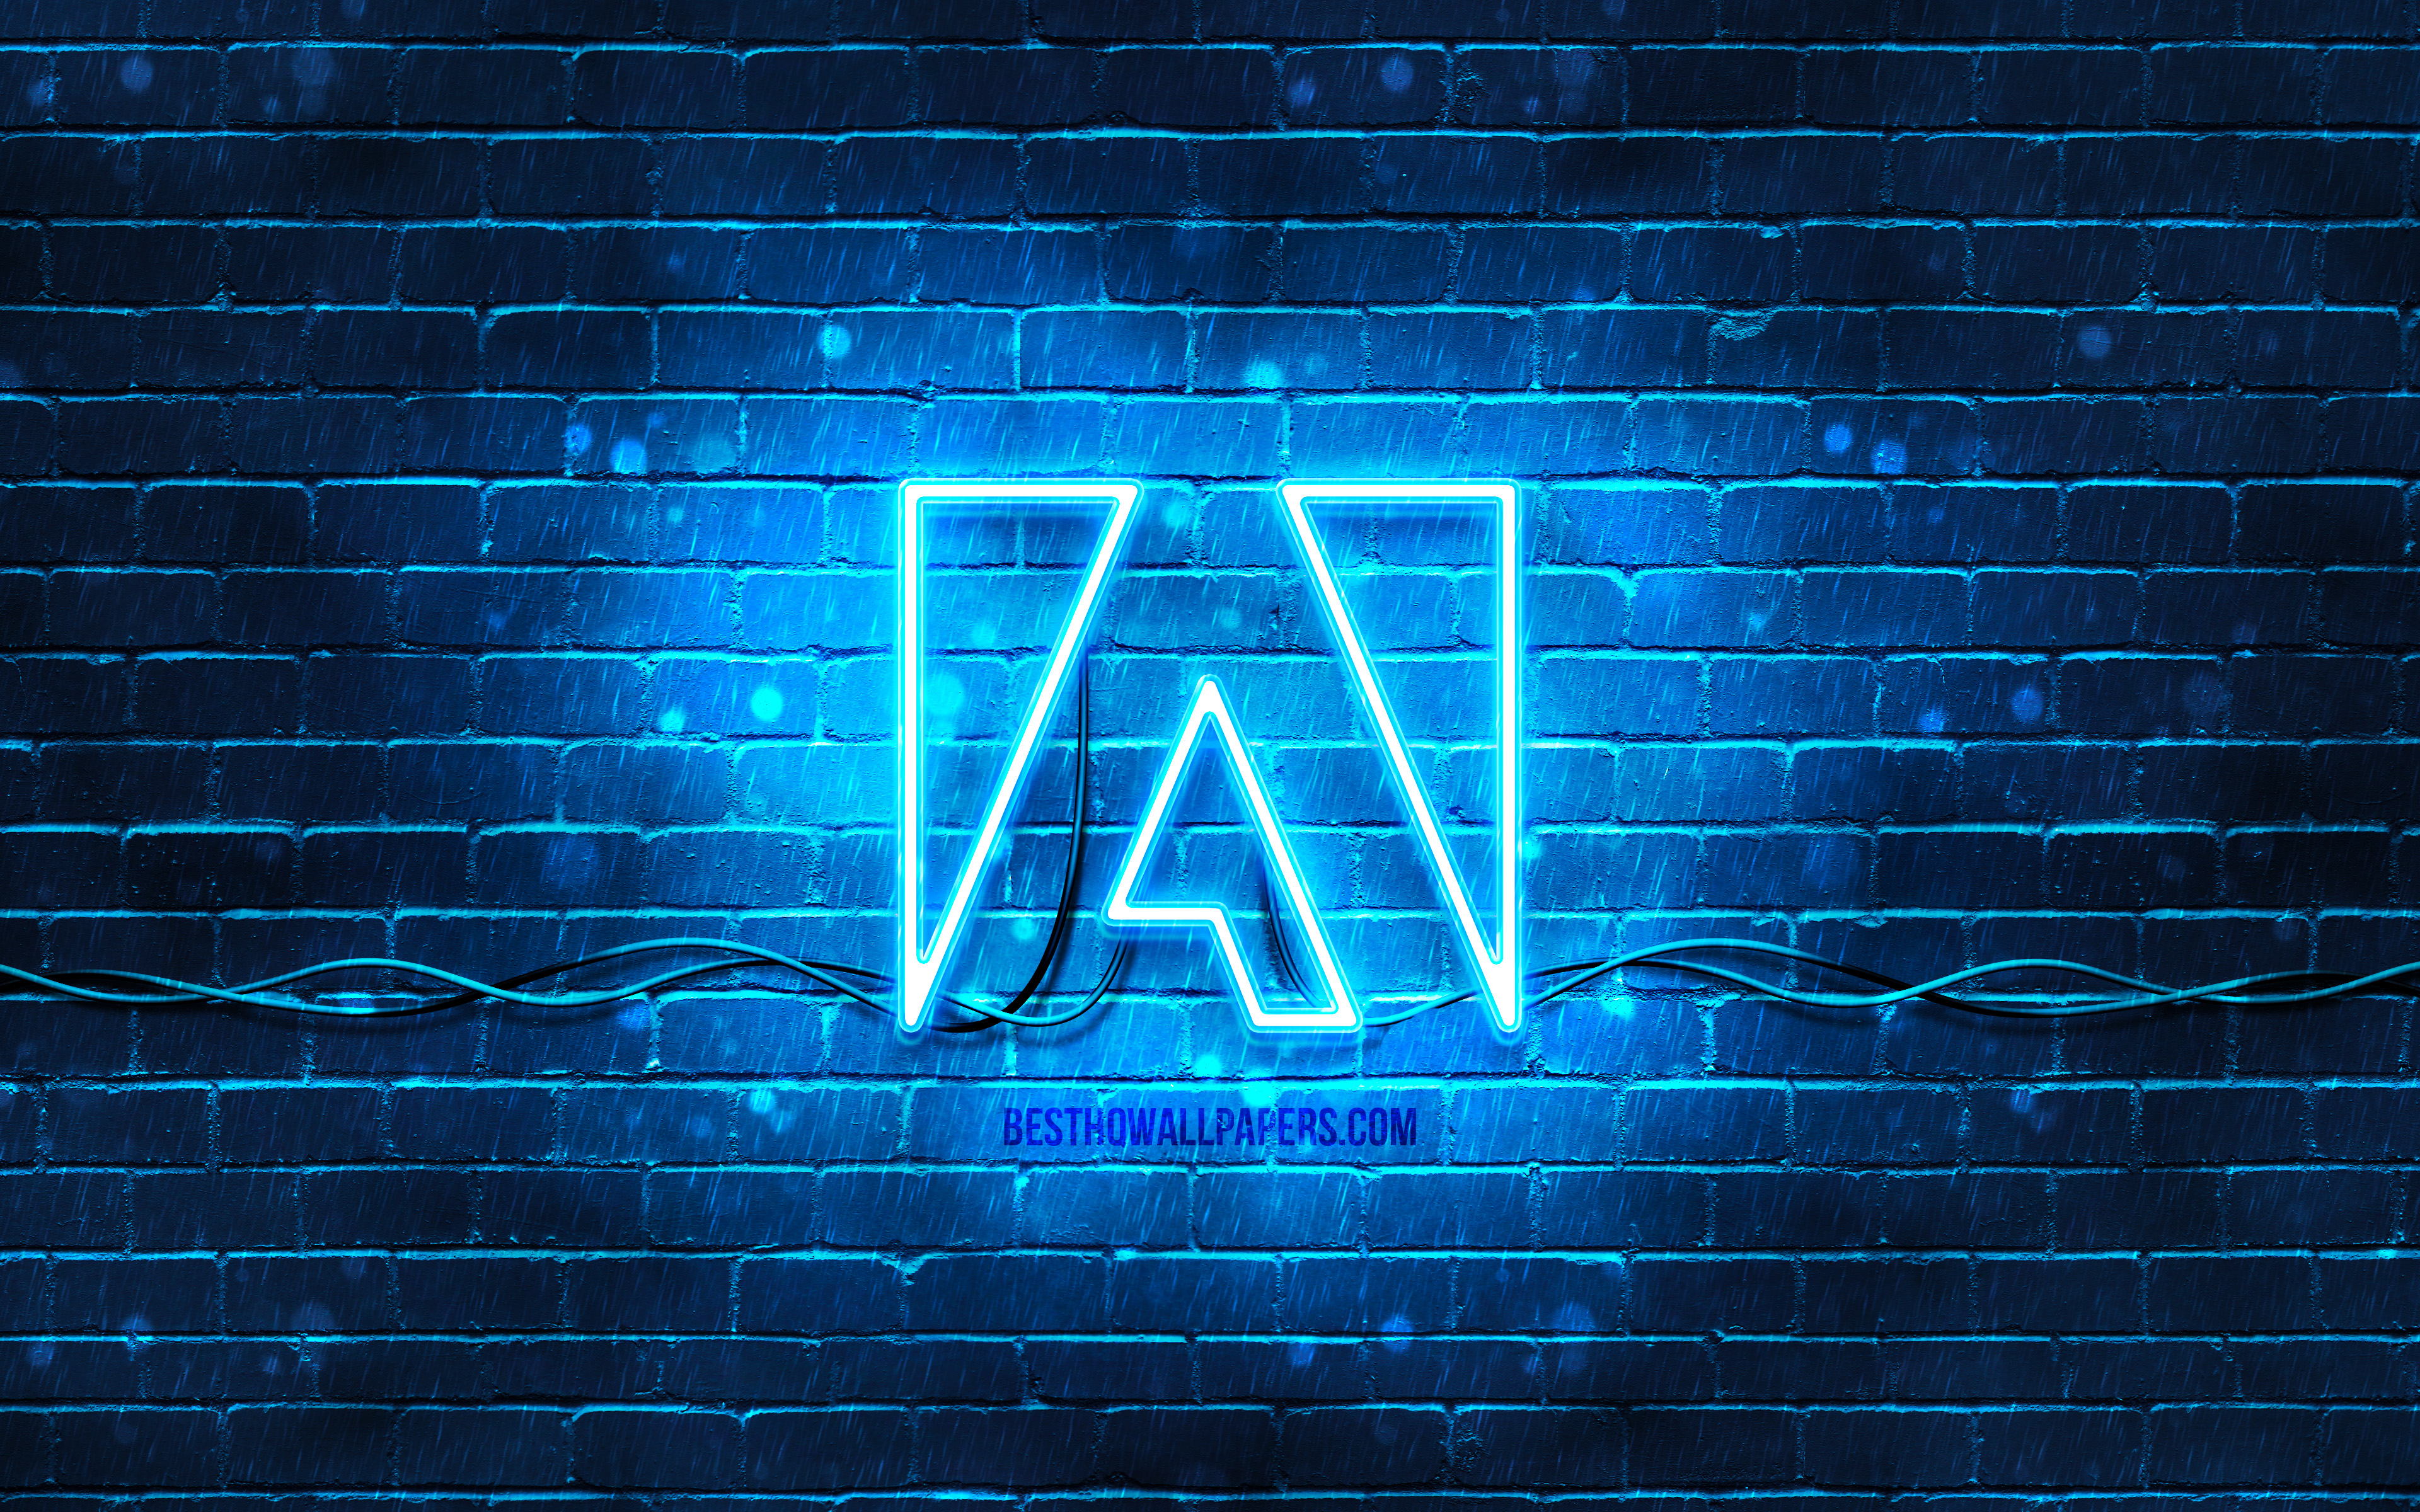 Download wallpaper Adobe blue logo, 4k, blue brickwall, Adobe logo, brands, Adobe neon logo, Adobe for desktop with resolution 3840x2400. High Quality HD picture wallpaper